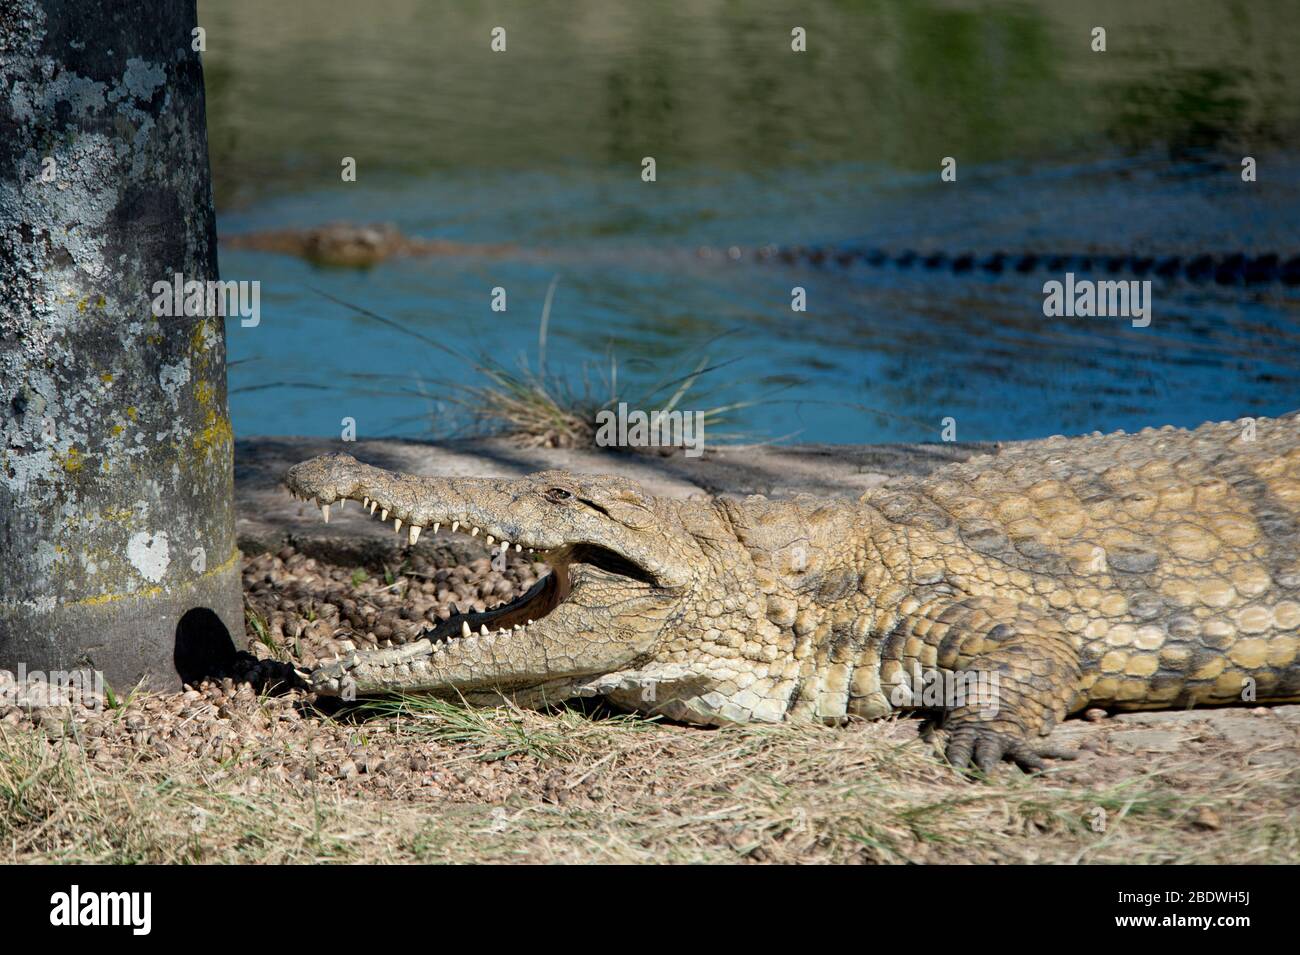 Nile Crocodile, Crocodylus niloticus, with open jaws and one swimming in background, Agatha Crocodile Ranch, Agatha, Tzaneen district, Limpopo Stock Photo